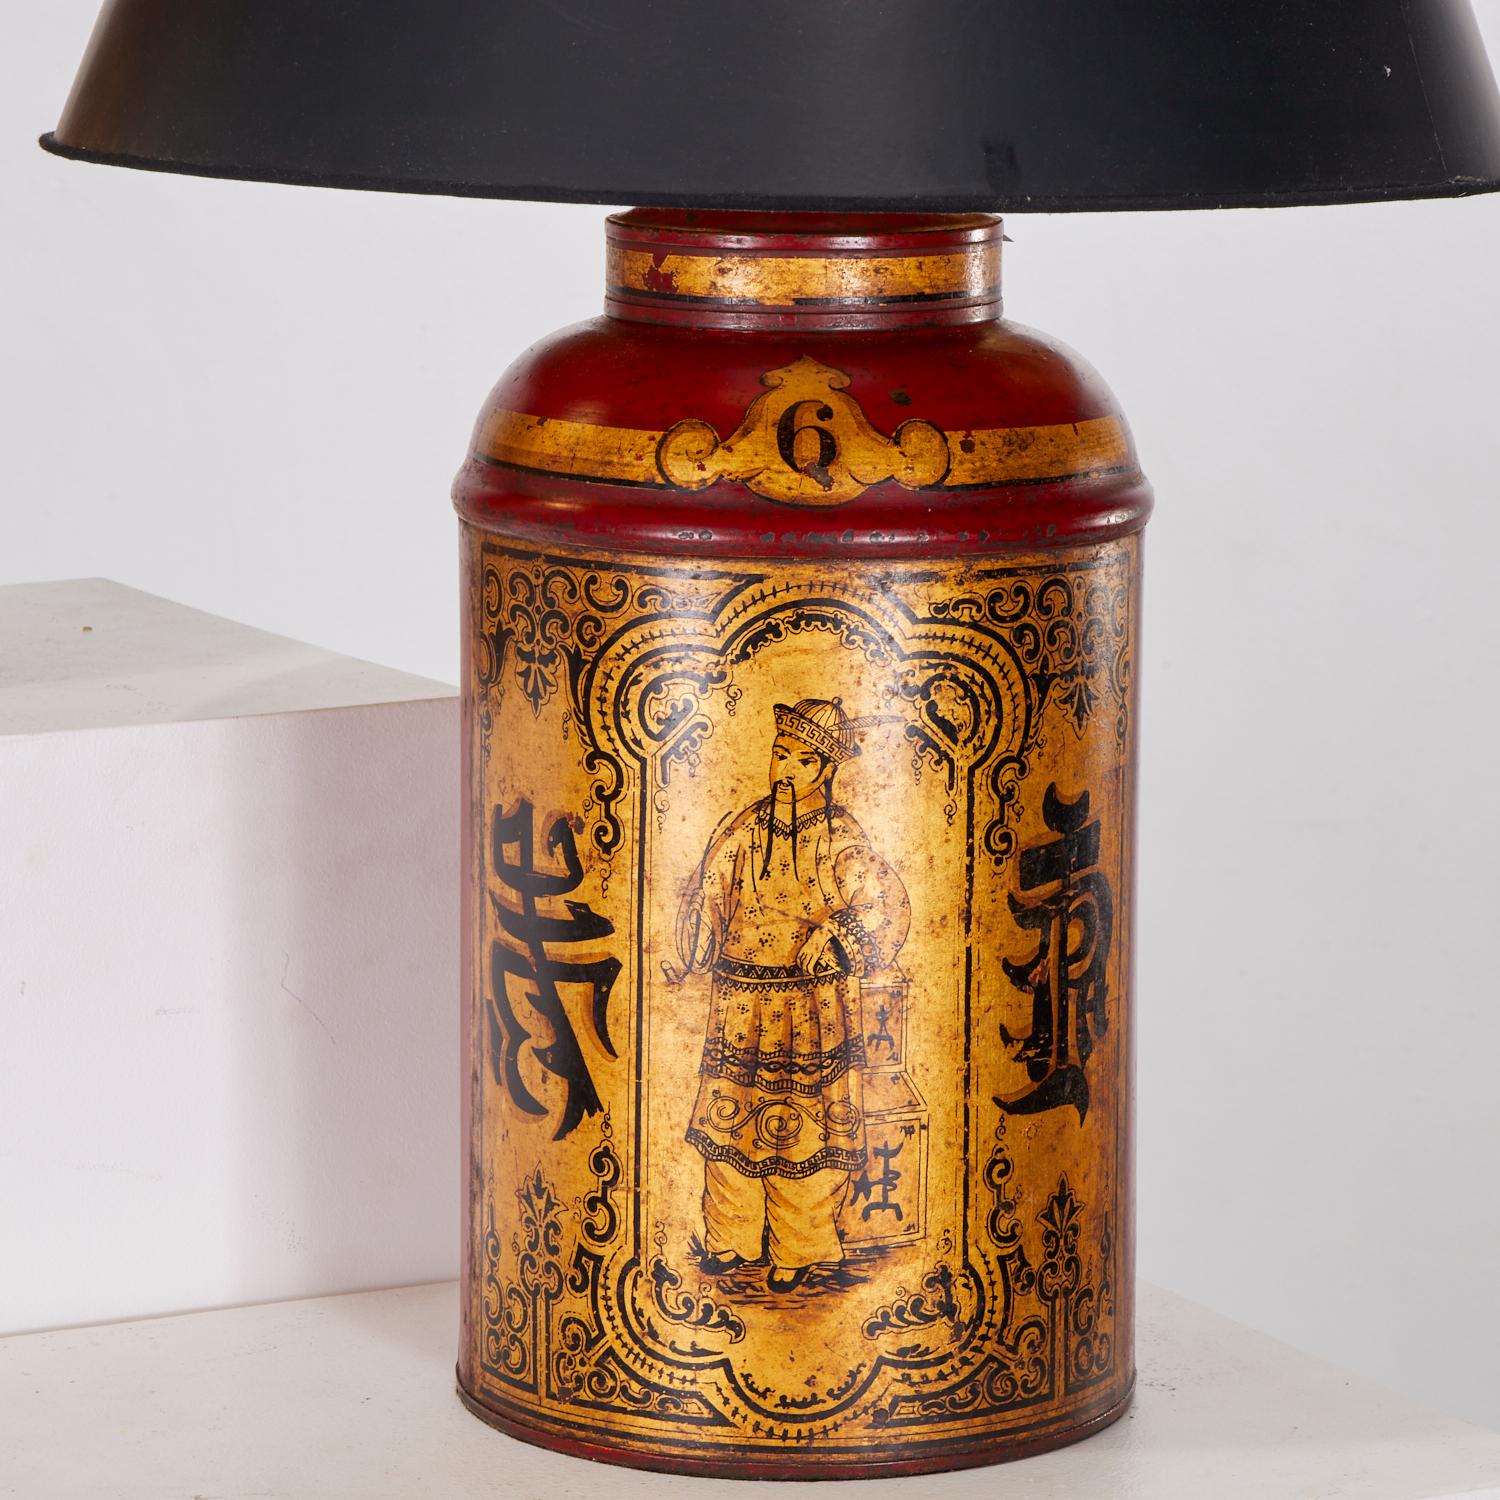 Late 19th c., England, a pair of gilt and red enameled sheet metal tea canister table lamps, decorated with robed Mandarin figures standing by tea boxes and framed by faux-Chinese characters and numbered 5 and 6 respectively, mounted with a brass